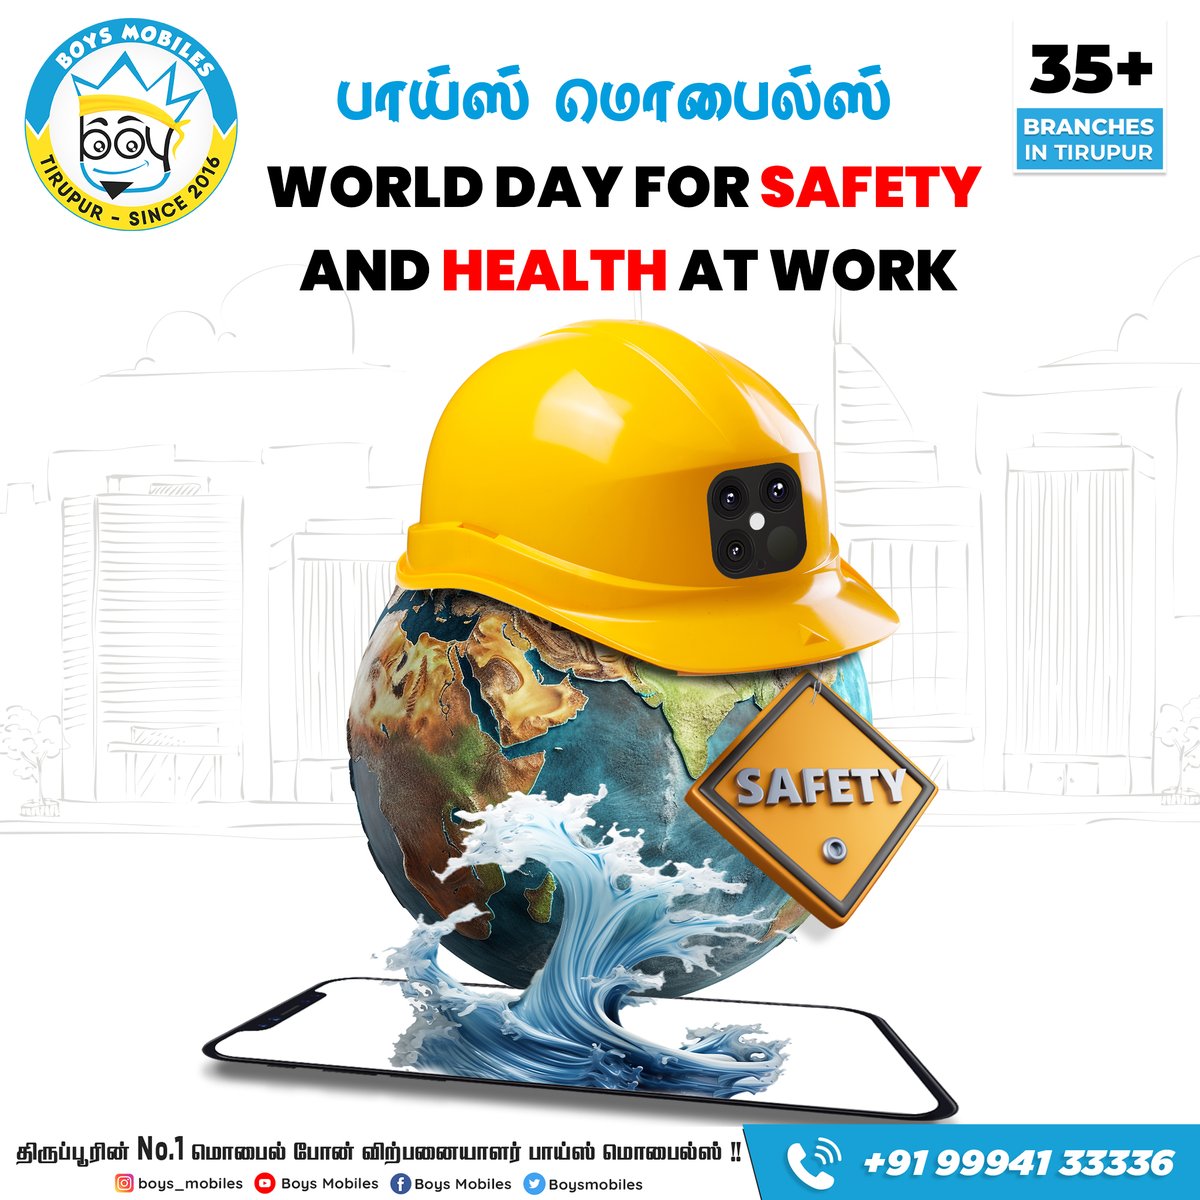 On this World Day of Health and Safety at Work, let's pledge to make every workplace a haven of well-being and security.

#Boysmobiles #WorkSafetyMatters #HealthyWorkplaces #SafetyFirstAlways #SafeAtWork #WorkWellness #PreventAccidents #EmployeeSafety #SafeWorkEnvironment